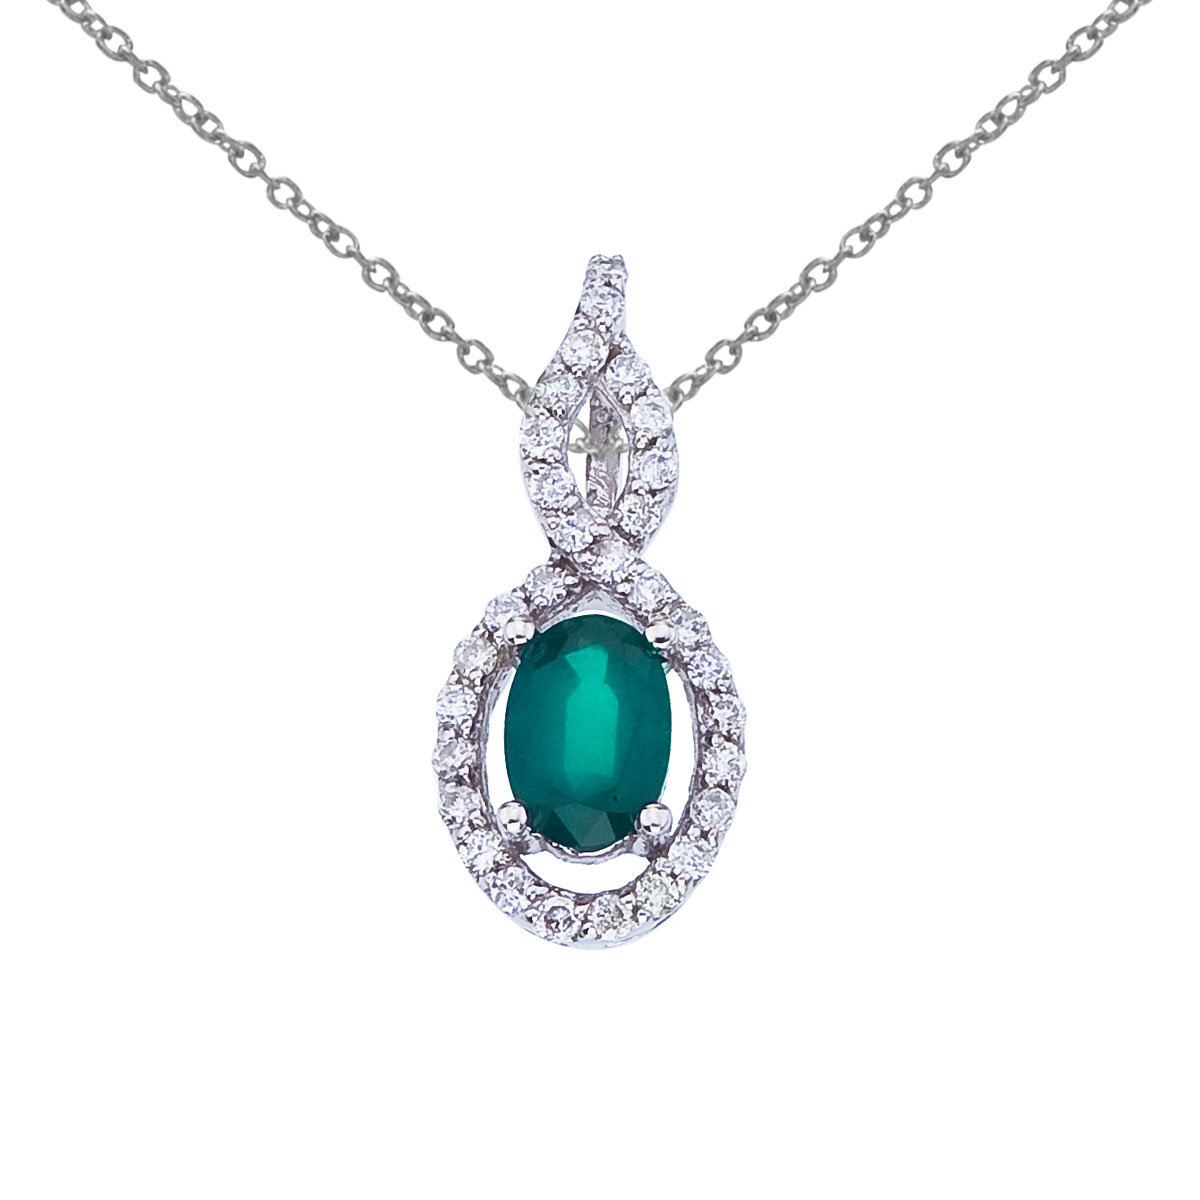 JCX2578: Luminous 6x4 mm emerald pendant surrounded by .18 total ct diamonds set in 14k white gold.